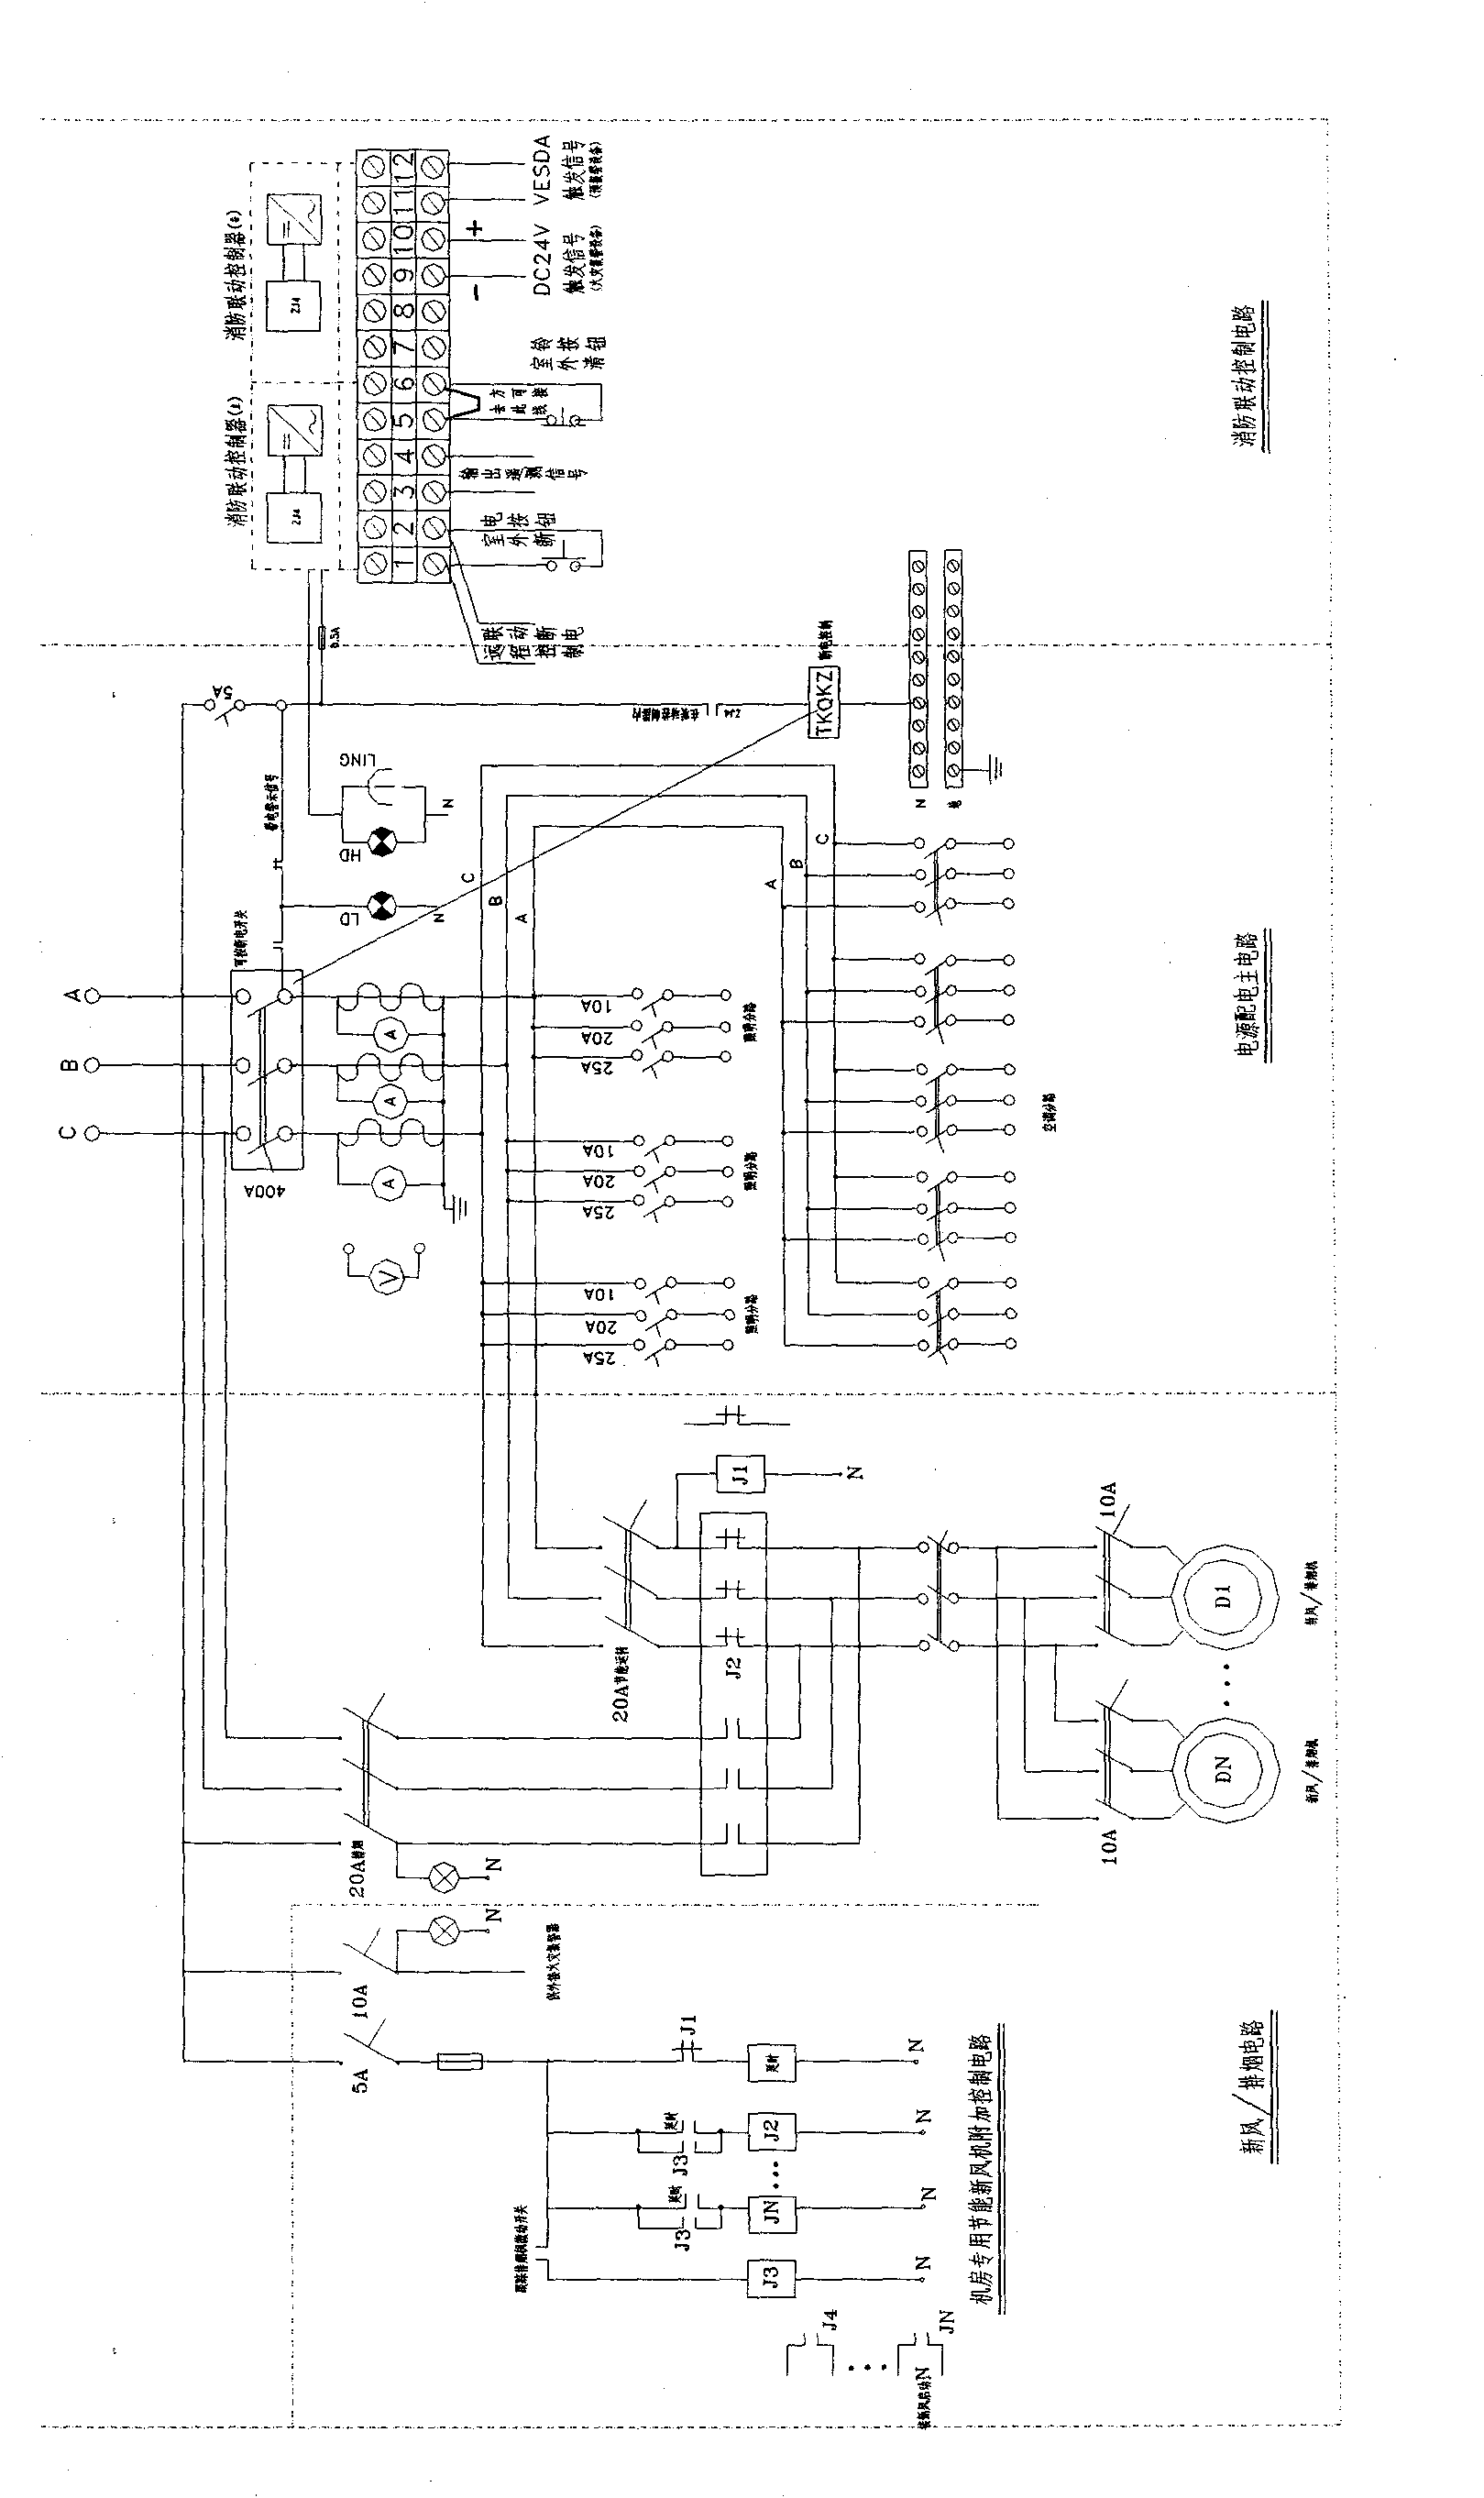 Fire-fighting linkage system and equipment applied to communication machine room